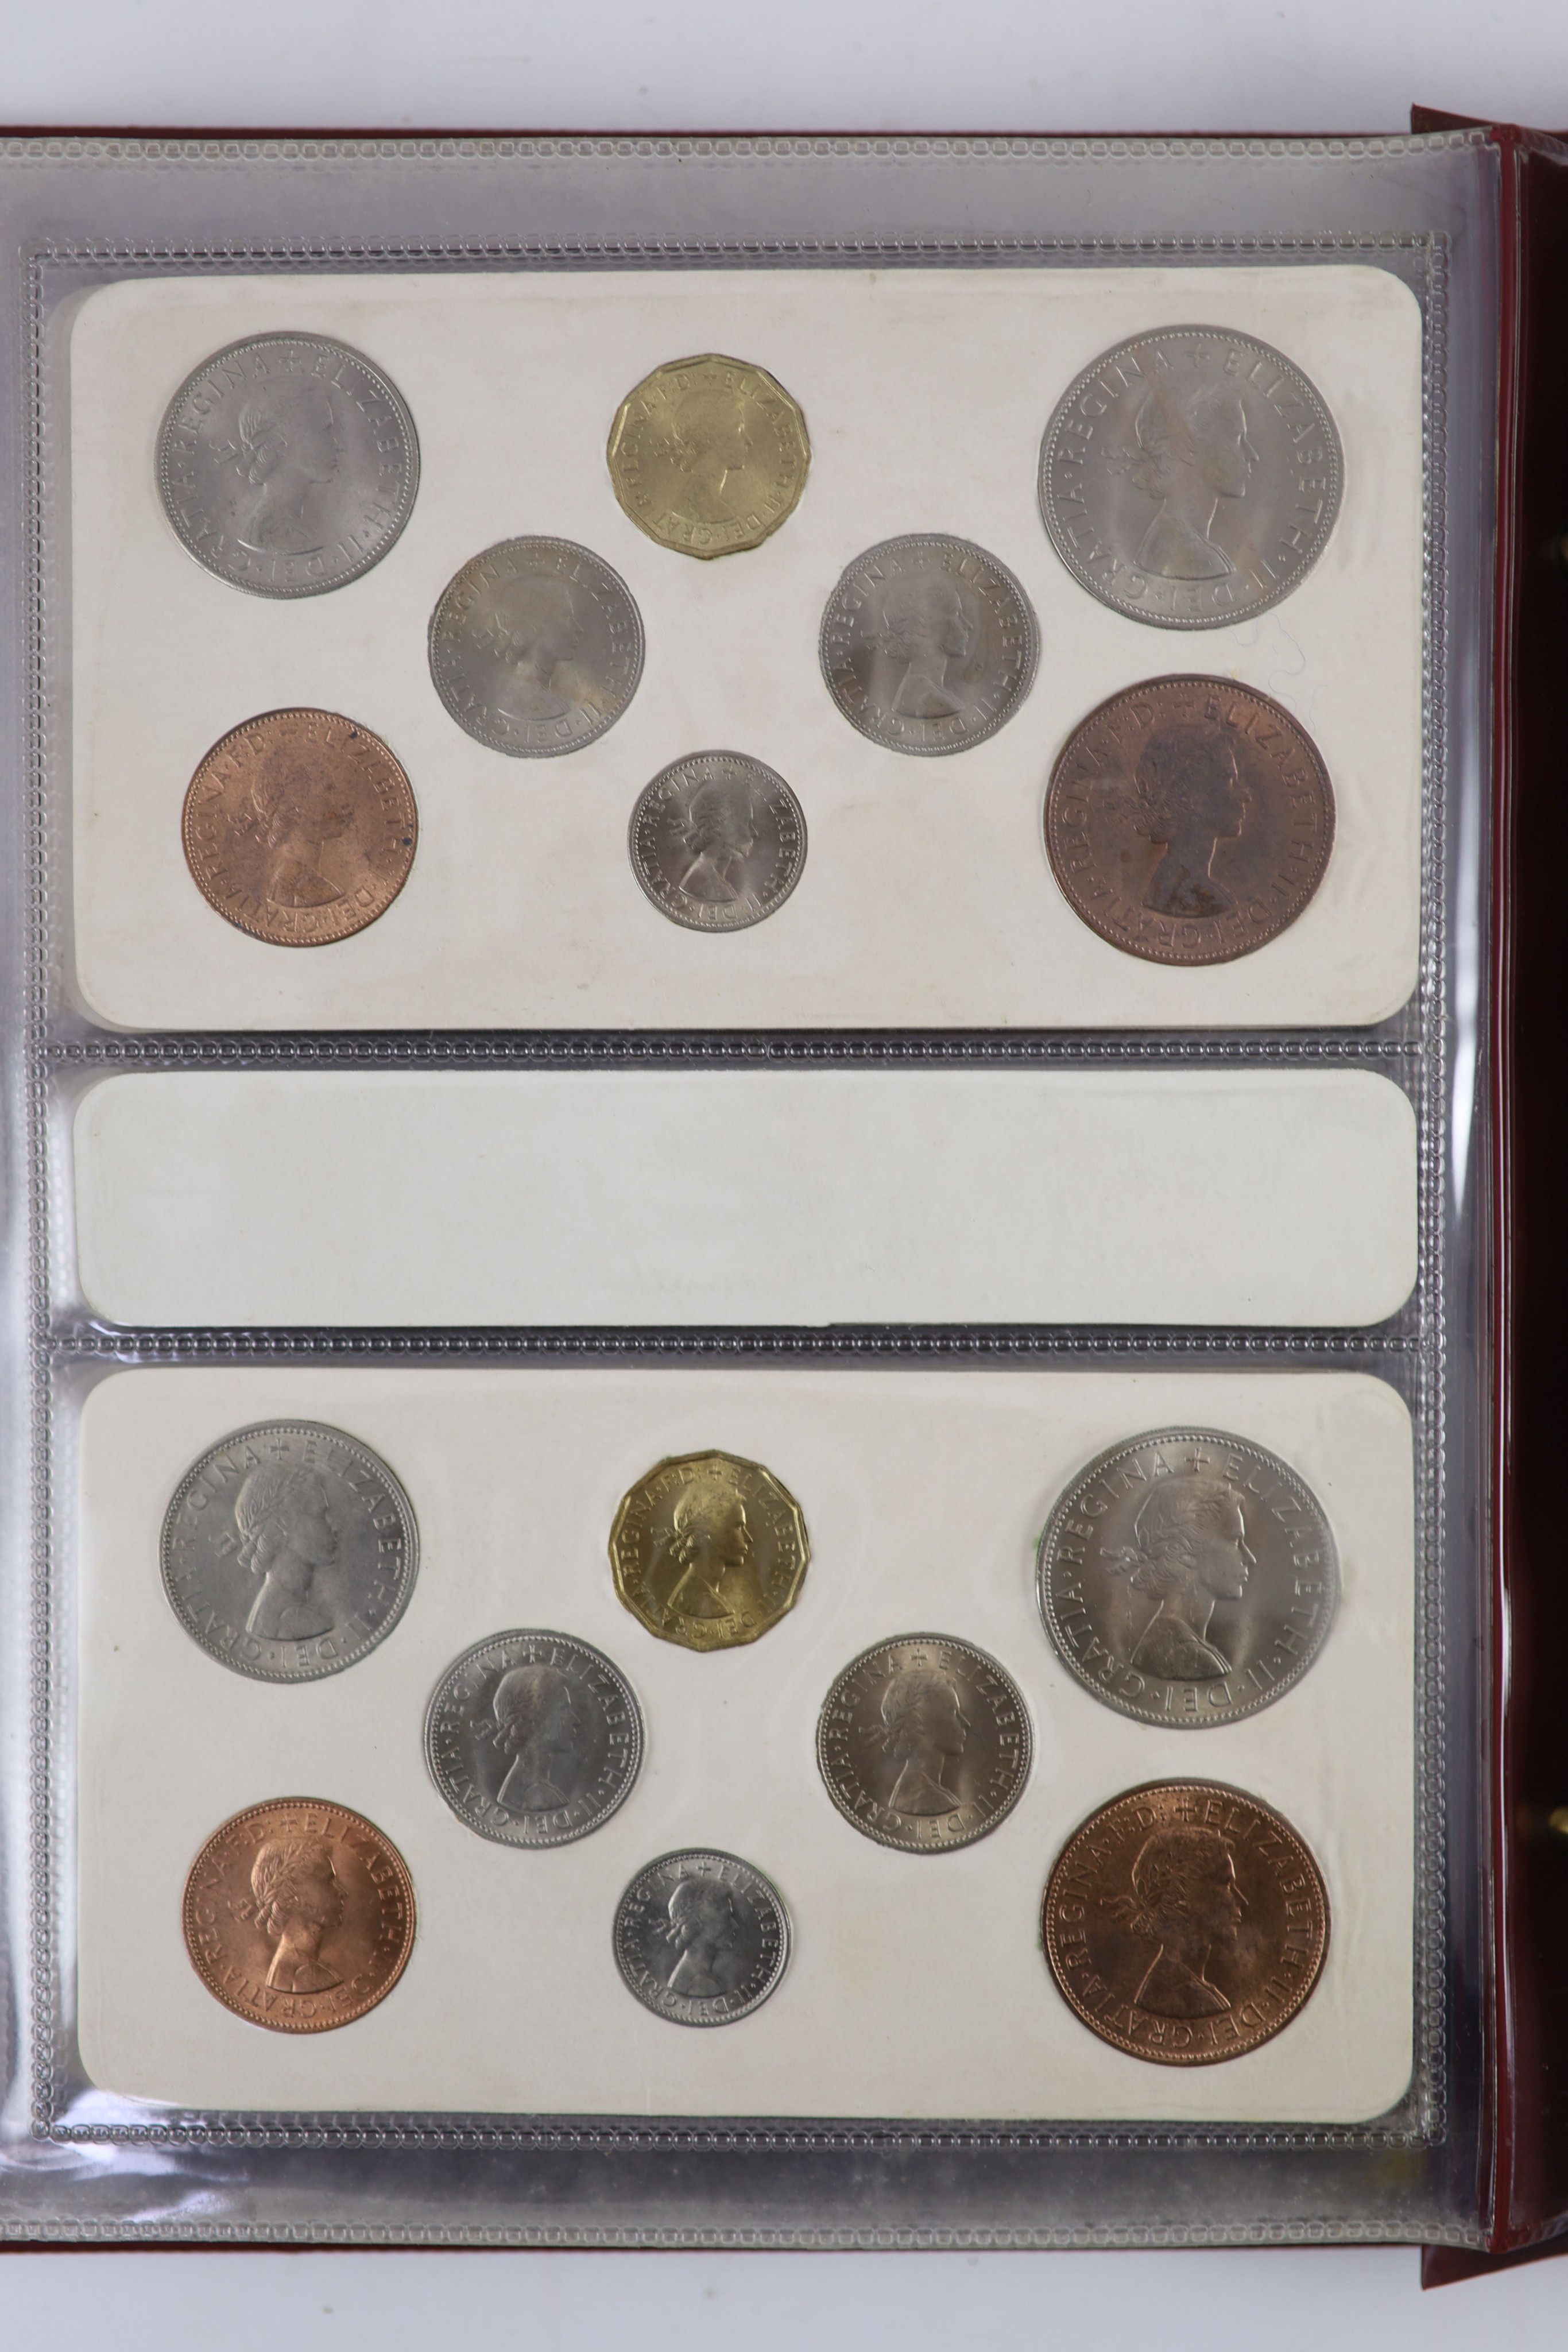 Queen Elizabeth II pre-decimal specimen coin sets for 1953 - 1967, first and second issues, all EF/UNC (15 sets), including 1954, 1957-1959 halfcrowns, florins and shillings, scarce in high grade